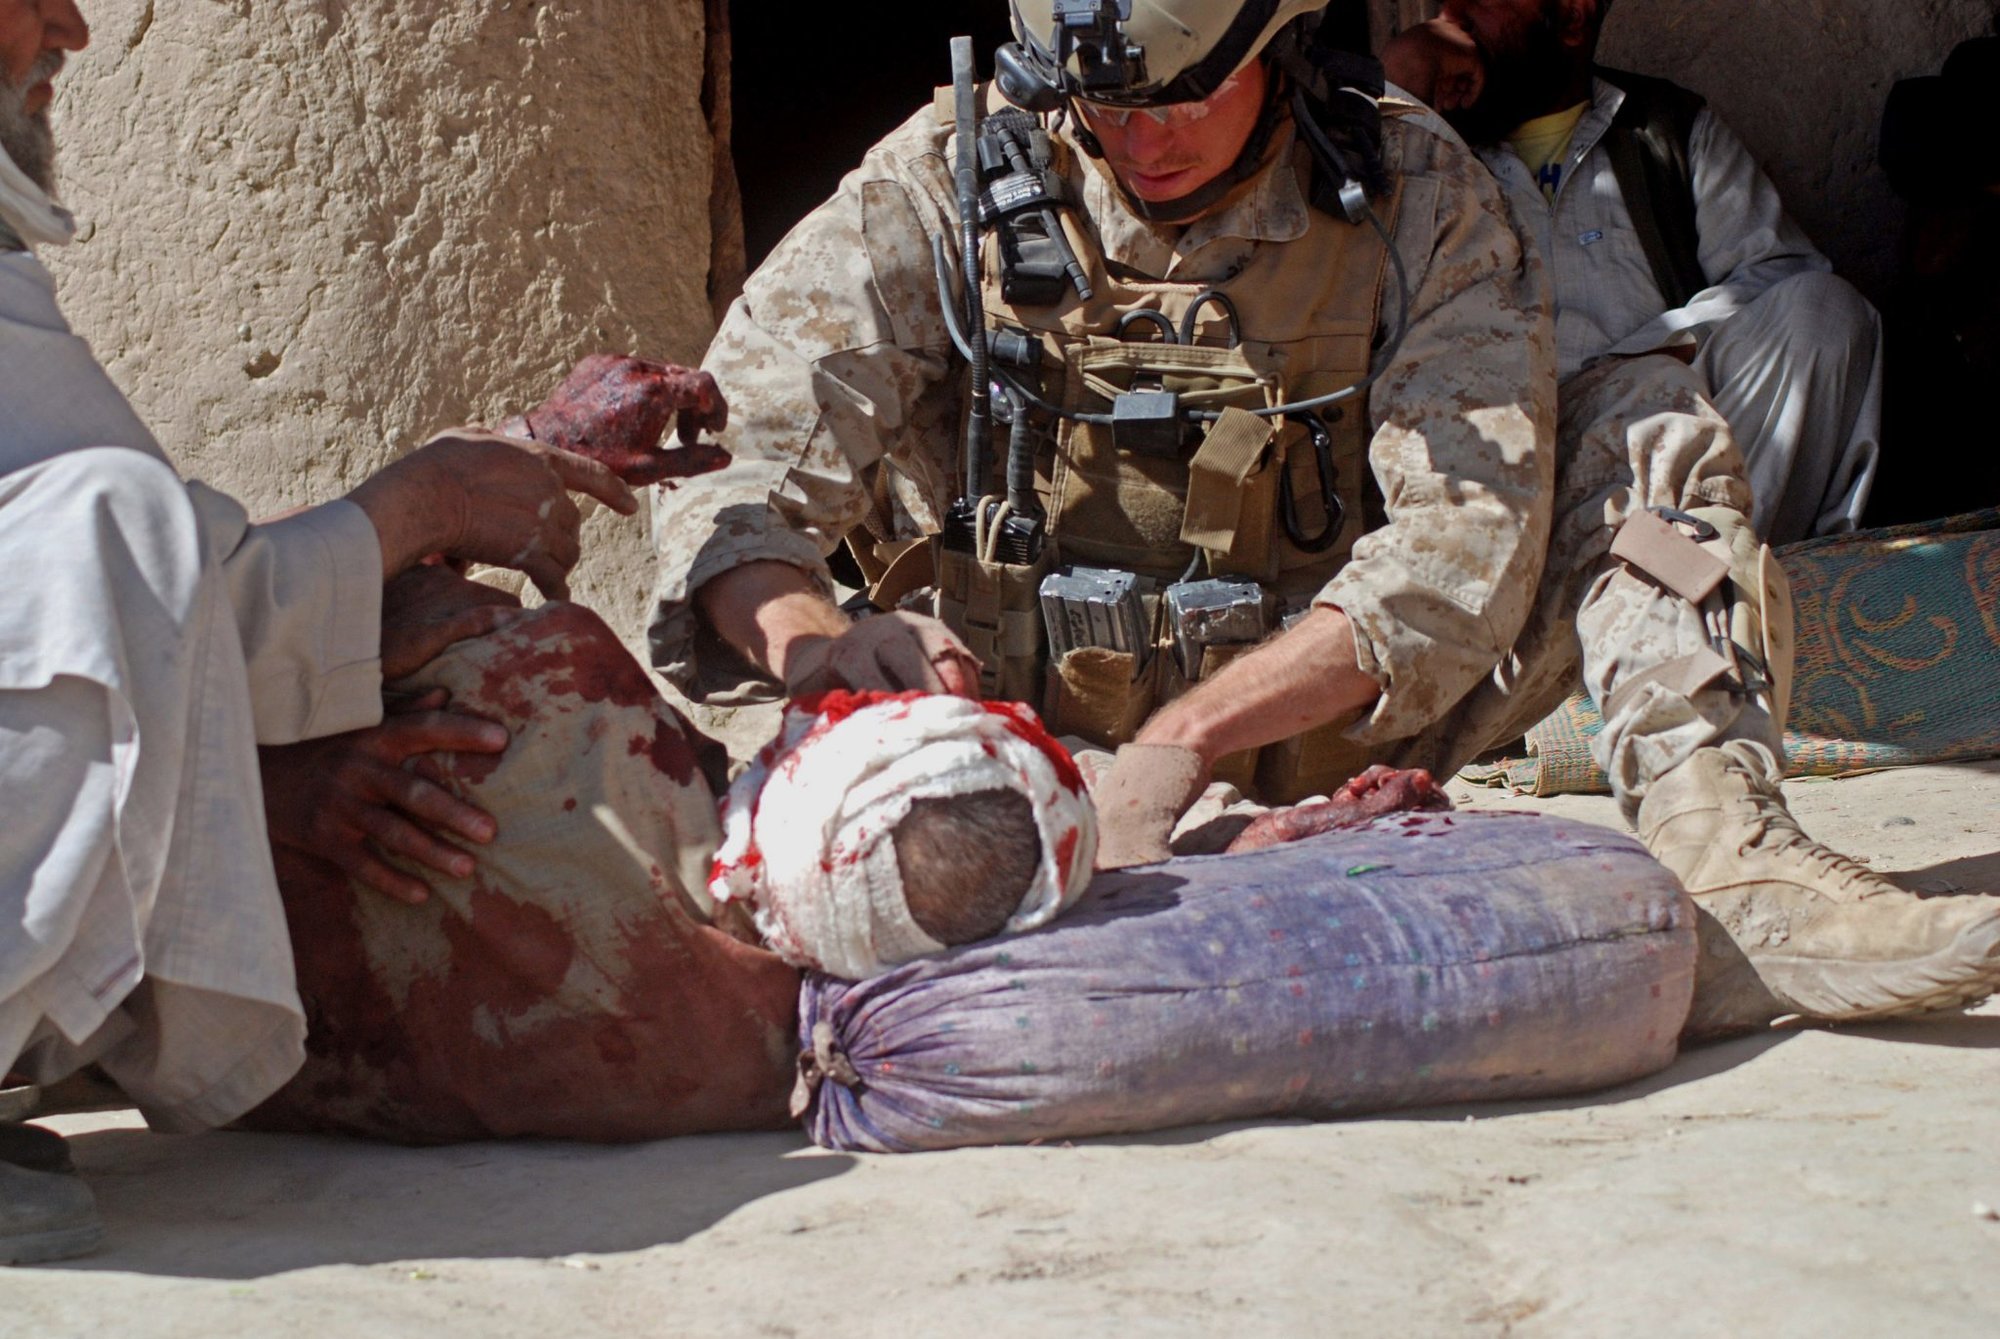 A Navy hospital corpsman assigned to the 1st Marine Special Operations Battalion treats a wounded civilian in a Helmand province, Afghanistan village after an attack by Taliban fighters.